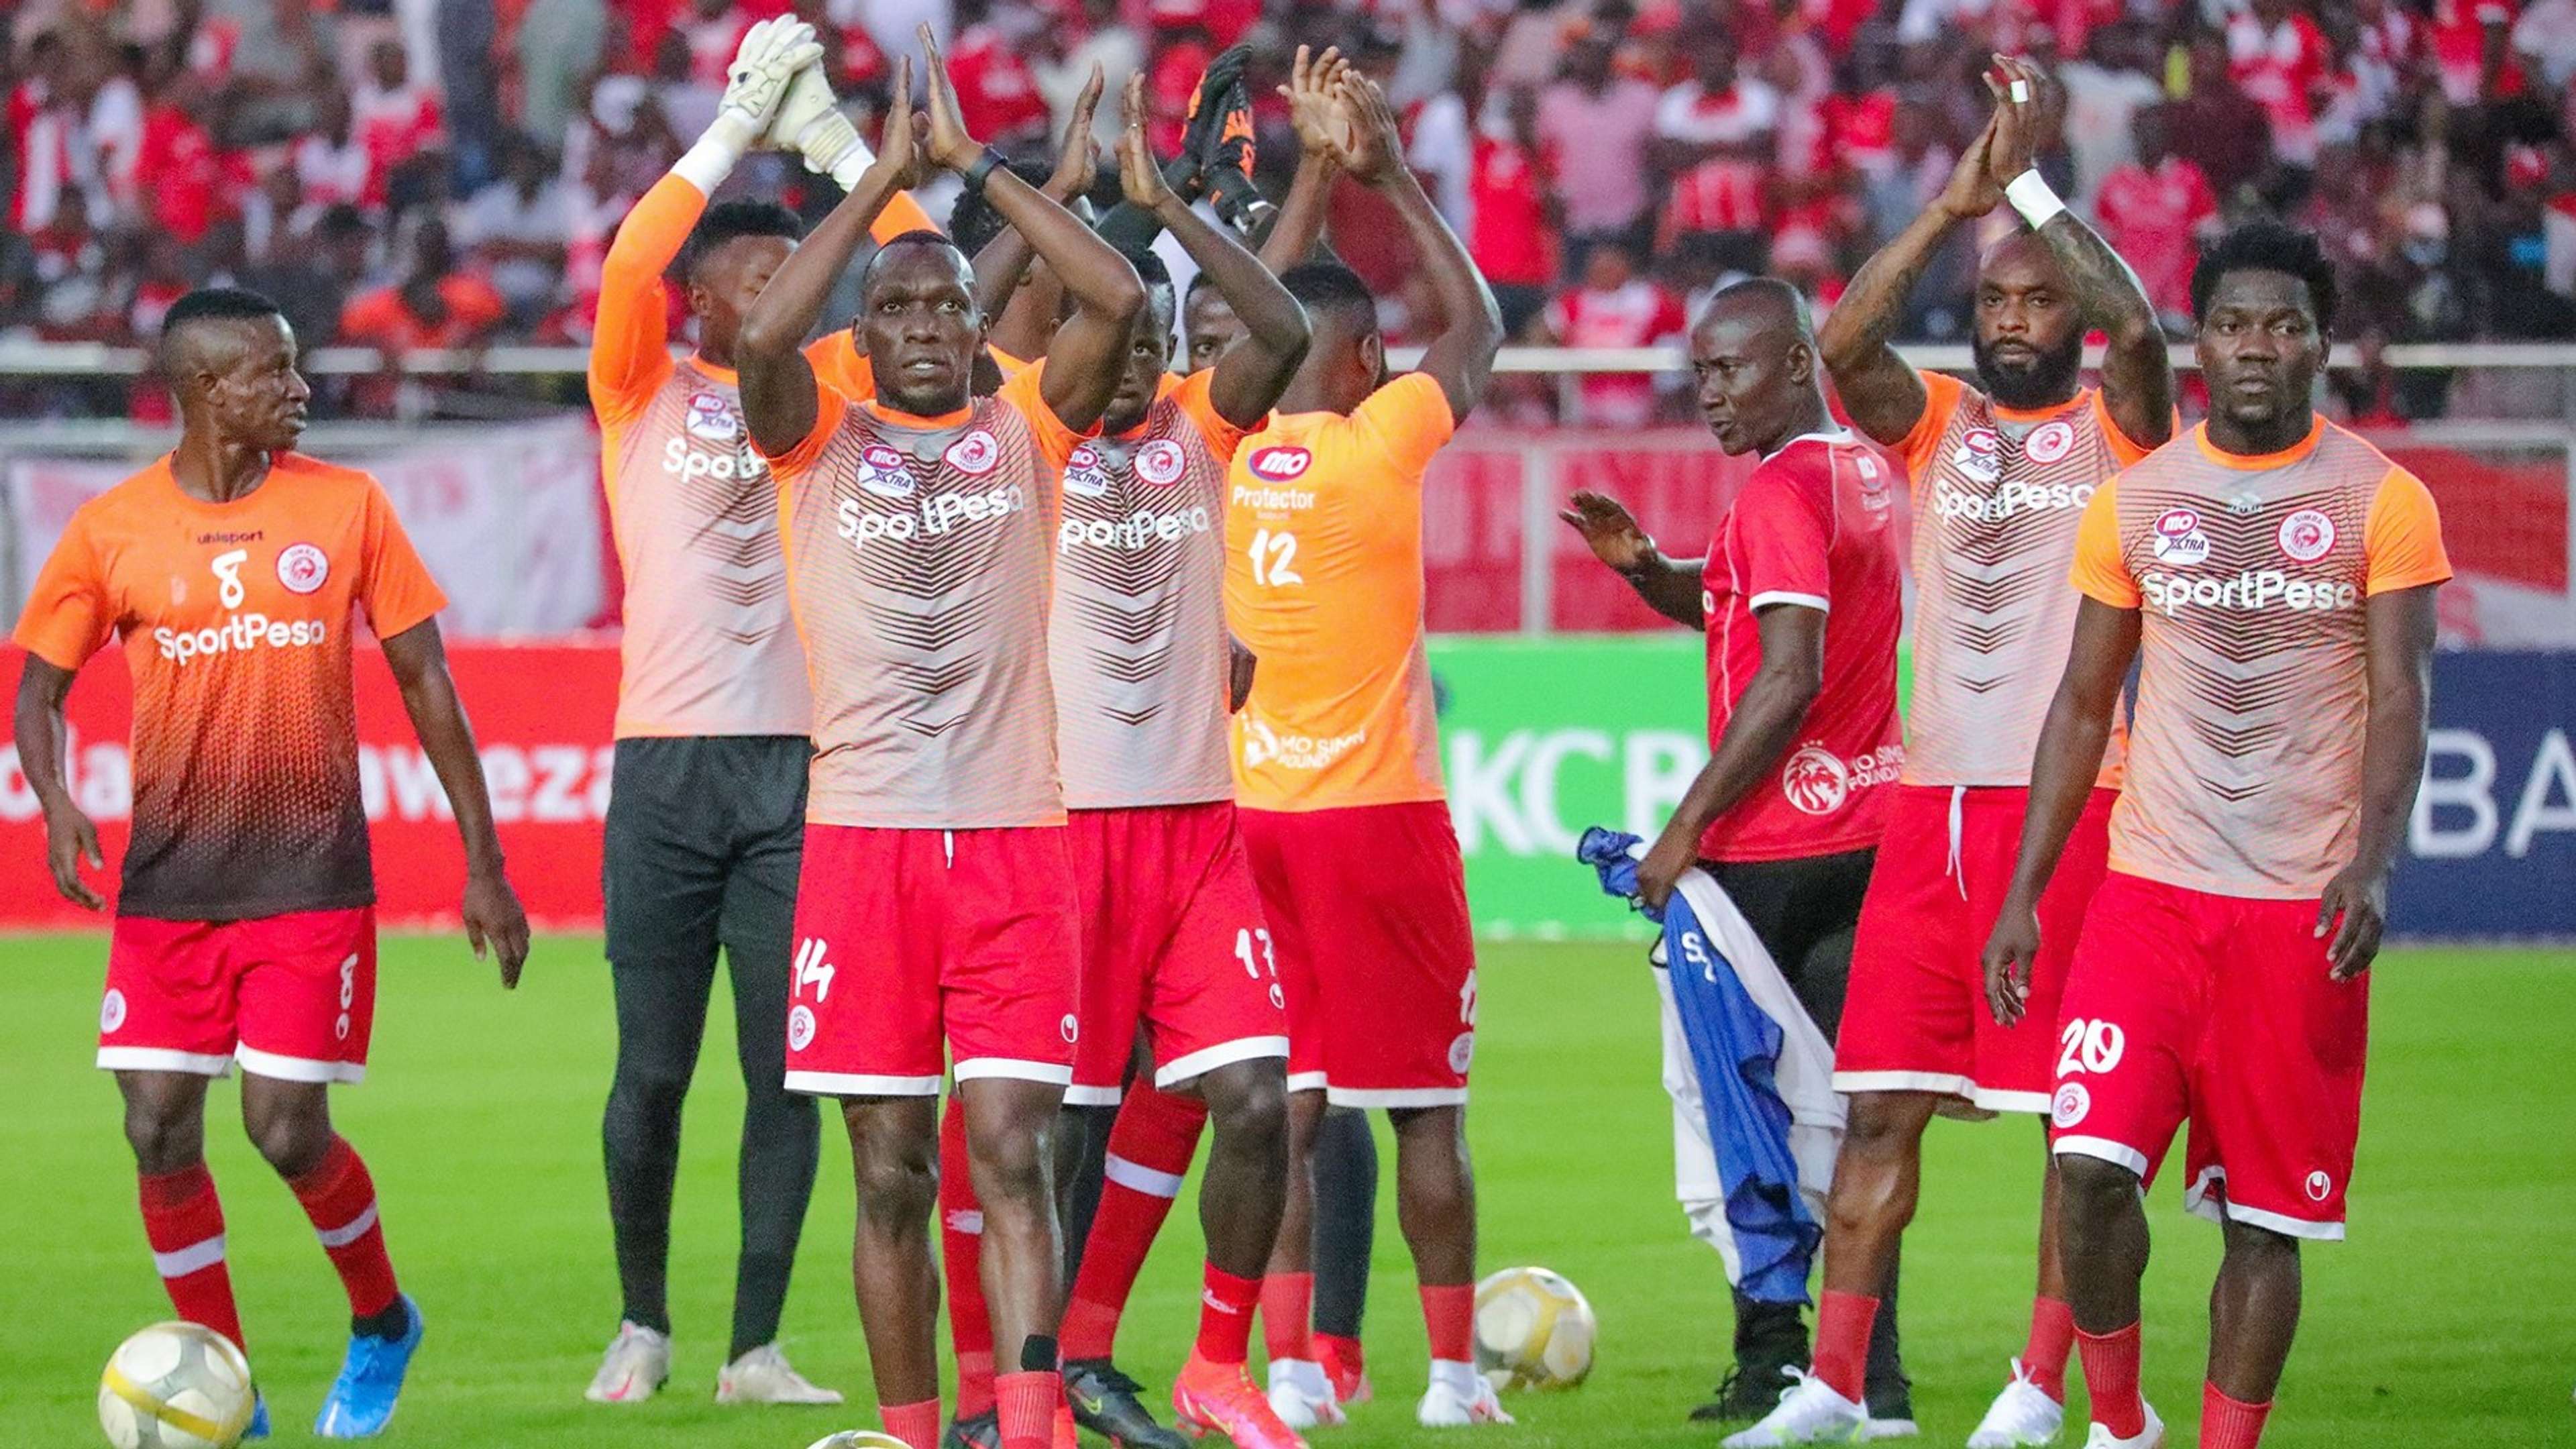 Simba SC players led by Meddie Kagere.